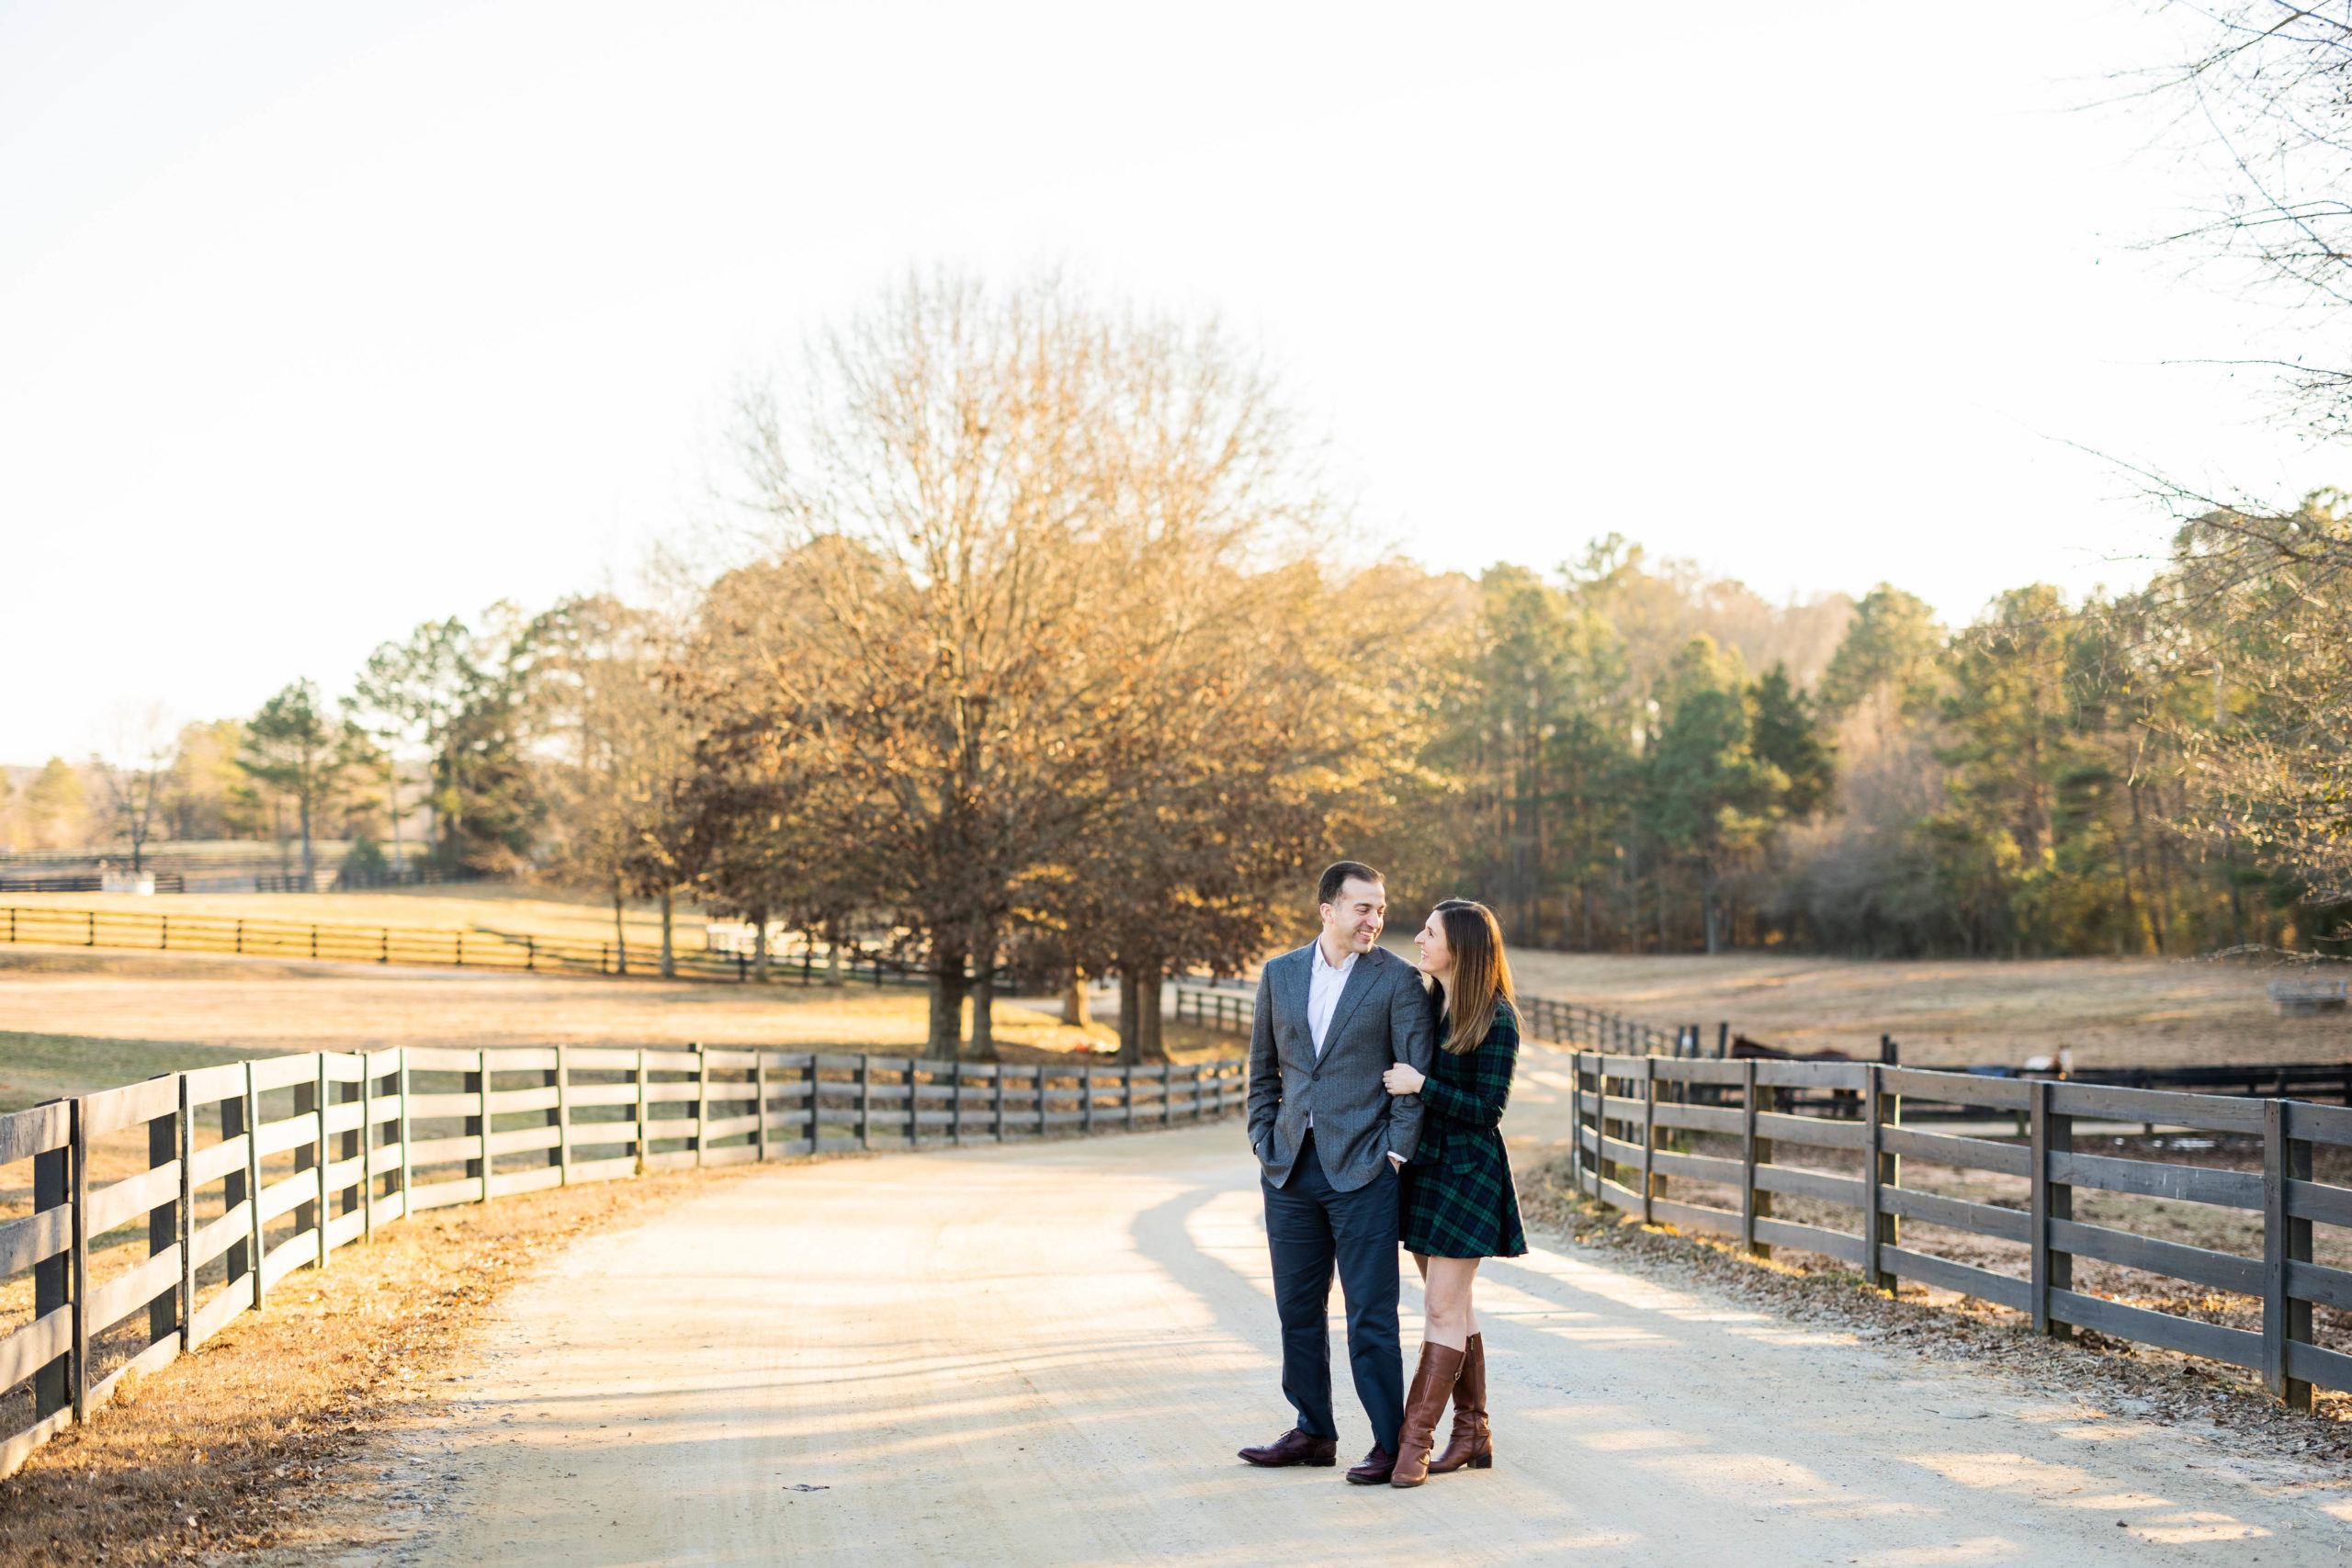 Eleanor Stenner Photography - a Birmingham, AL wedding photographer - shares tips on how to look after yourself while wedding planning!